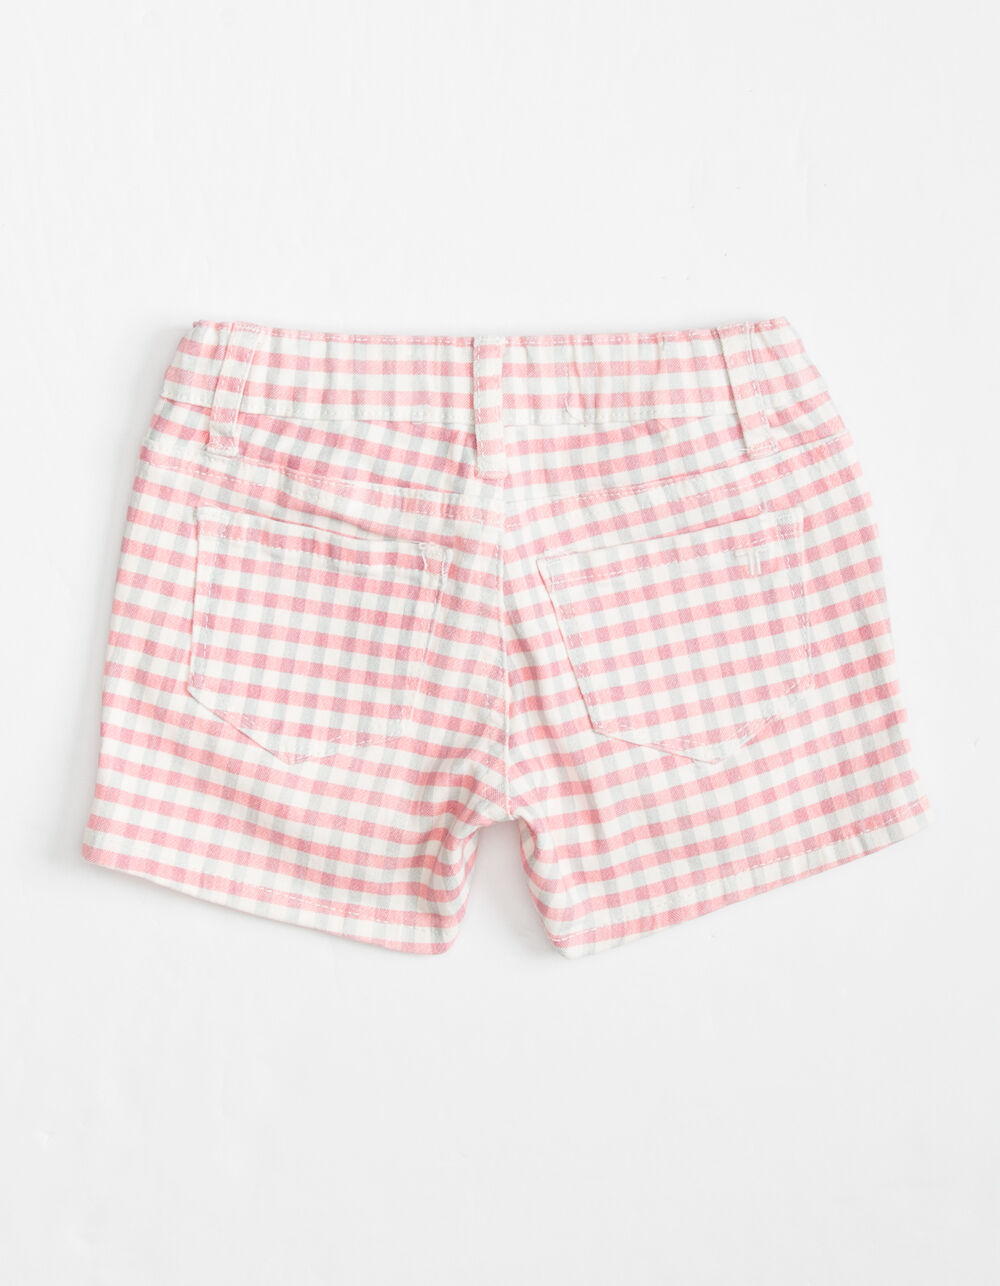 TRACTR Gingham Printed Little Girls Pink Shorts (4-6x) - PINK COMBO ...